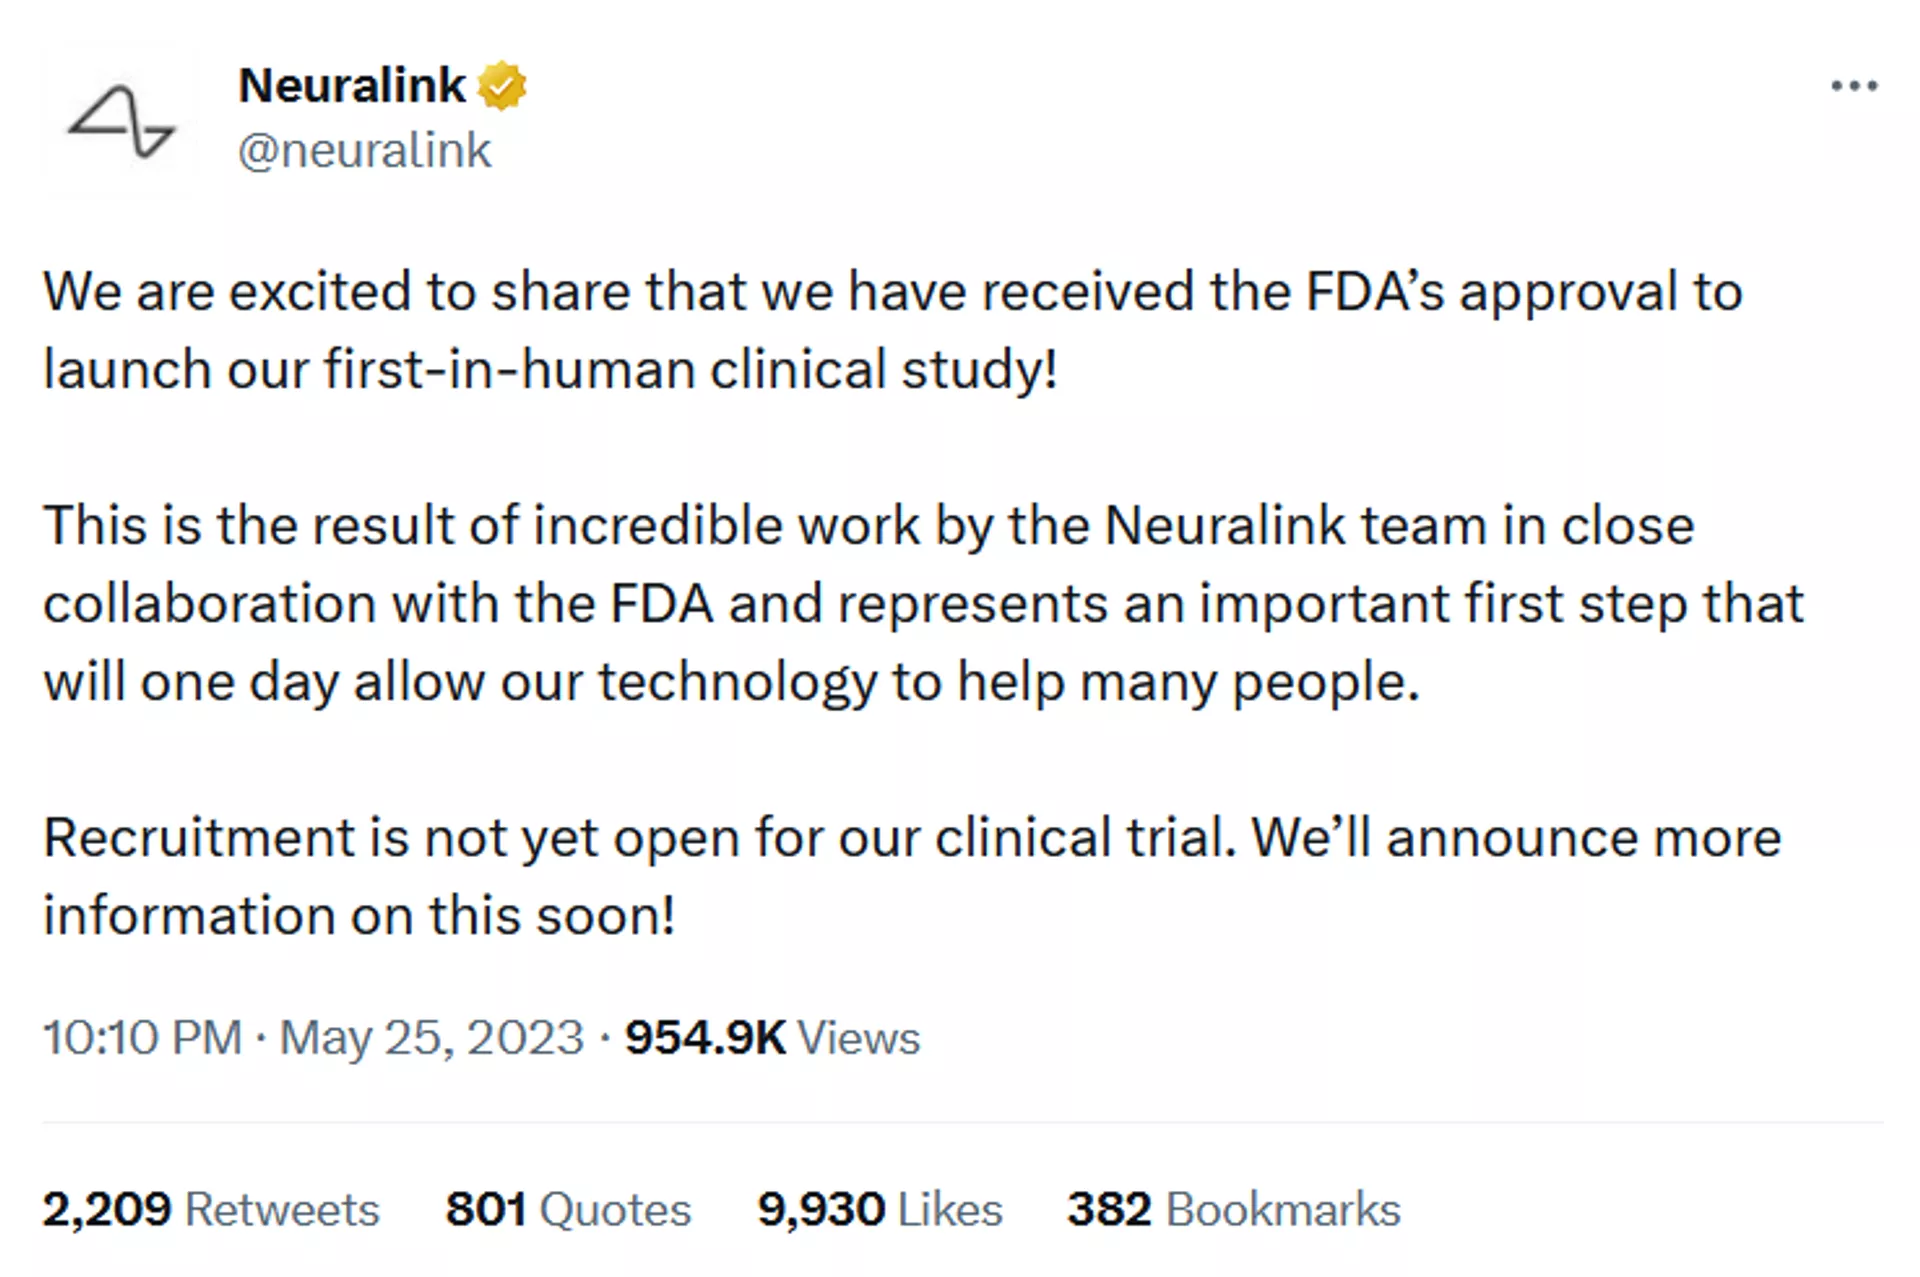 Message from the official Neuralink account on receipt of approval from the FDA. - Sputnik International, 1920, 26.05.2023